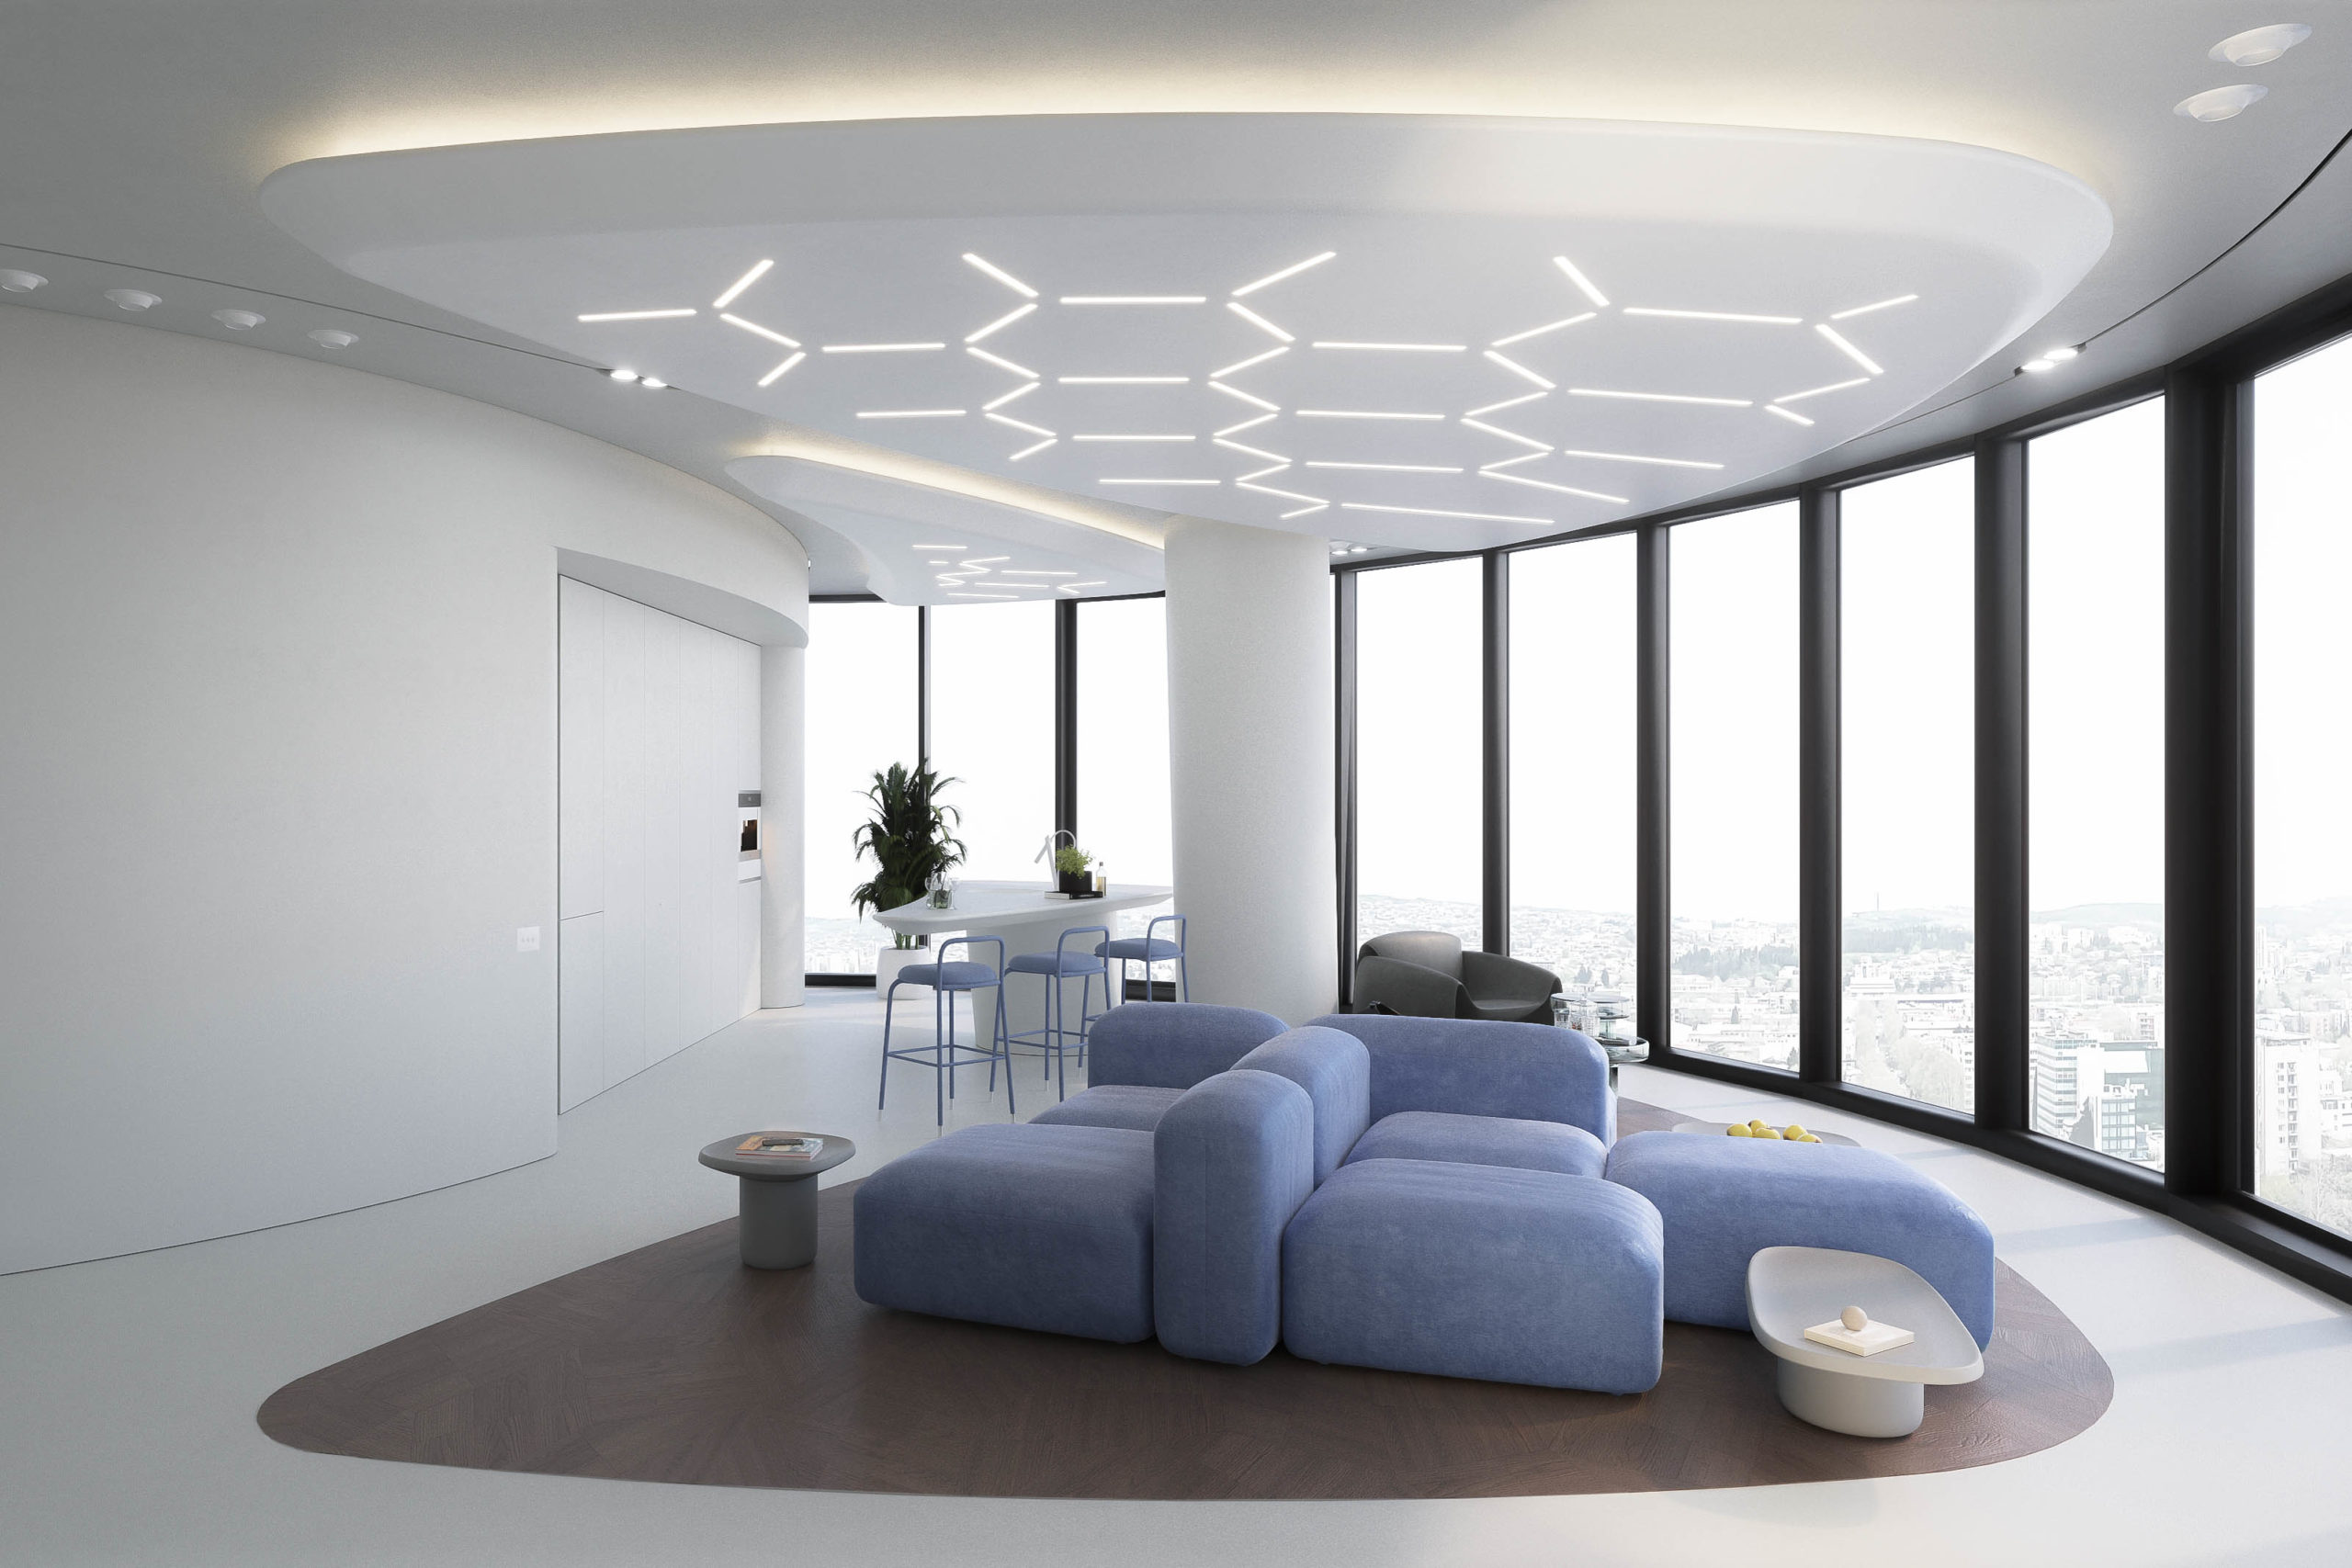 Illuminating Spaces: Transforming Your Home with Light